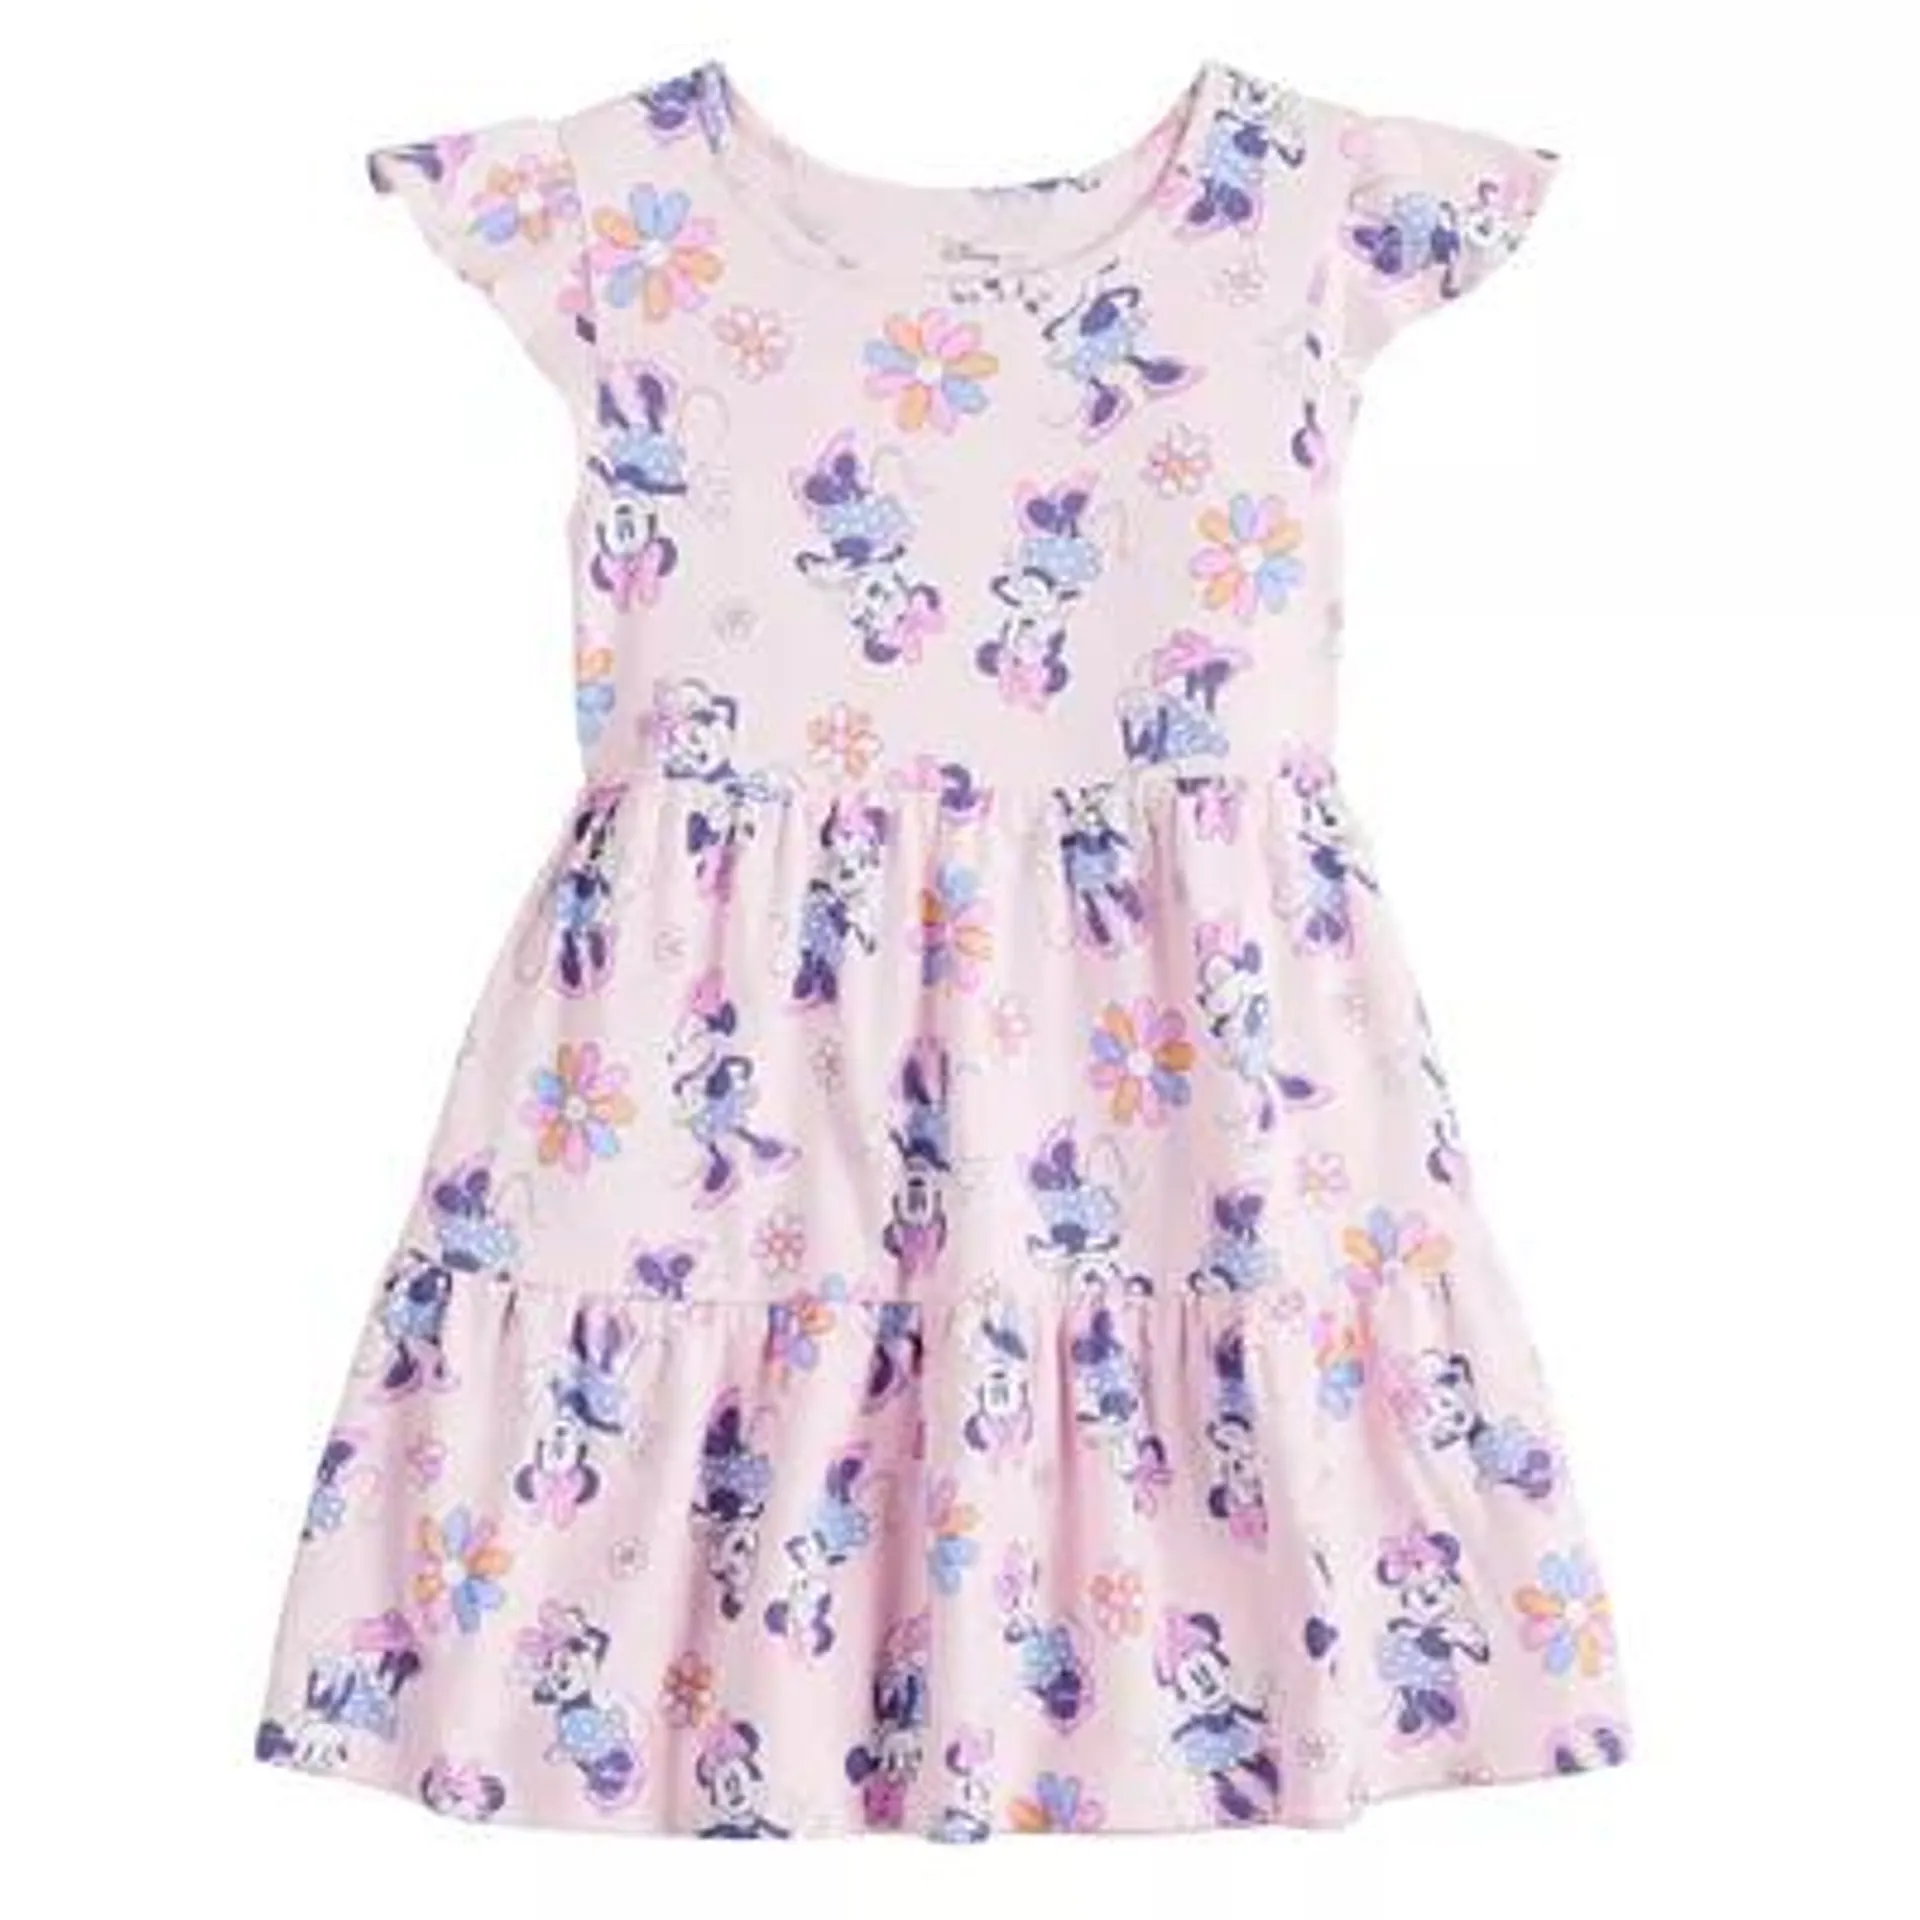 Disney's Minnie Mouse Toddler Girl Floral Flutter Sleeve Dress by Jumping Beans®